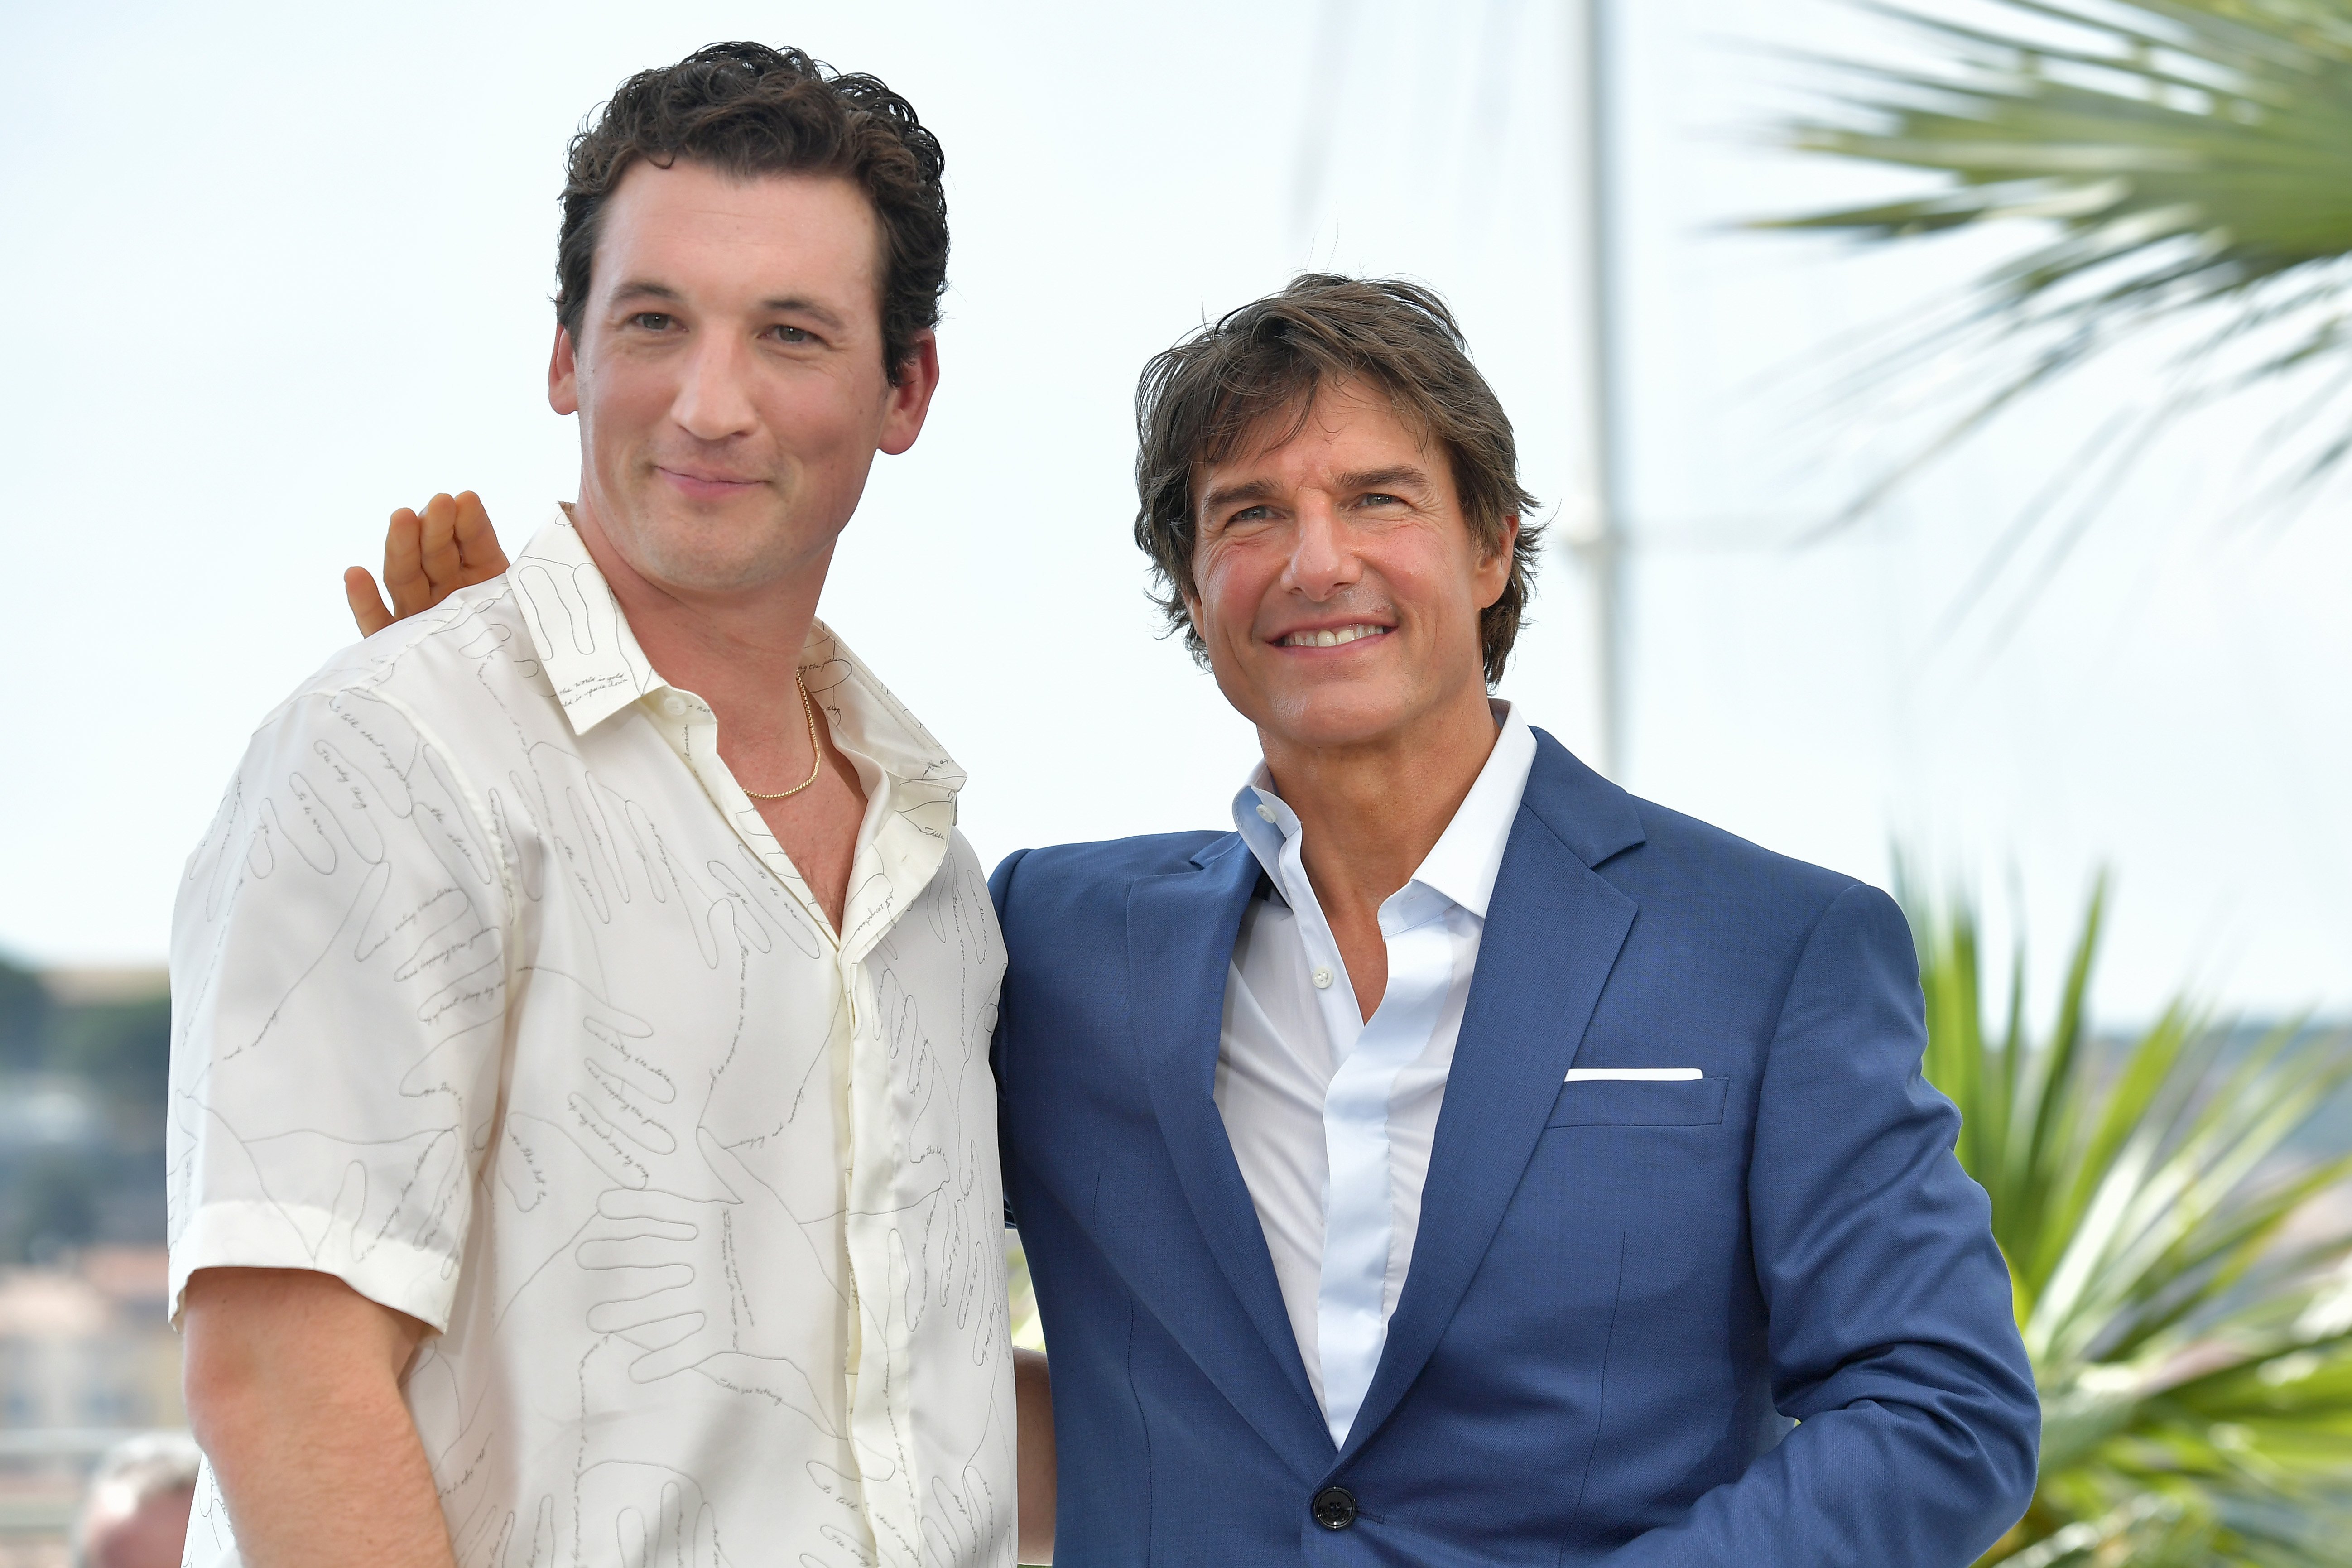 Miles Teller and Tom Cruise attend the photocall for 'Top Gun: Maverick' at the 75th annual Cannes film festival